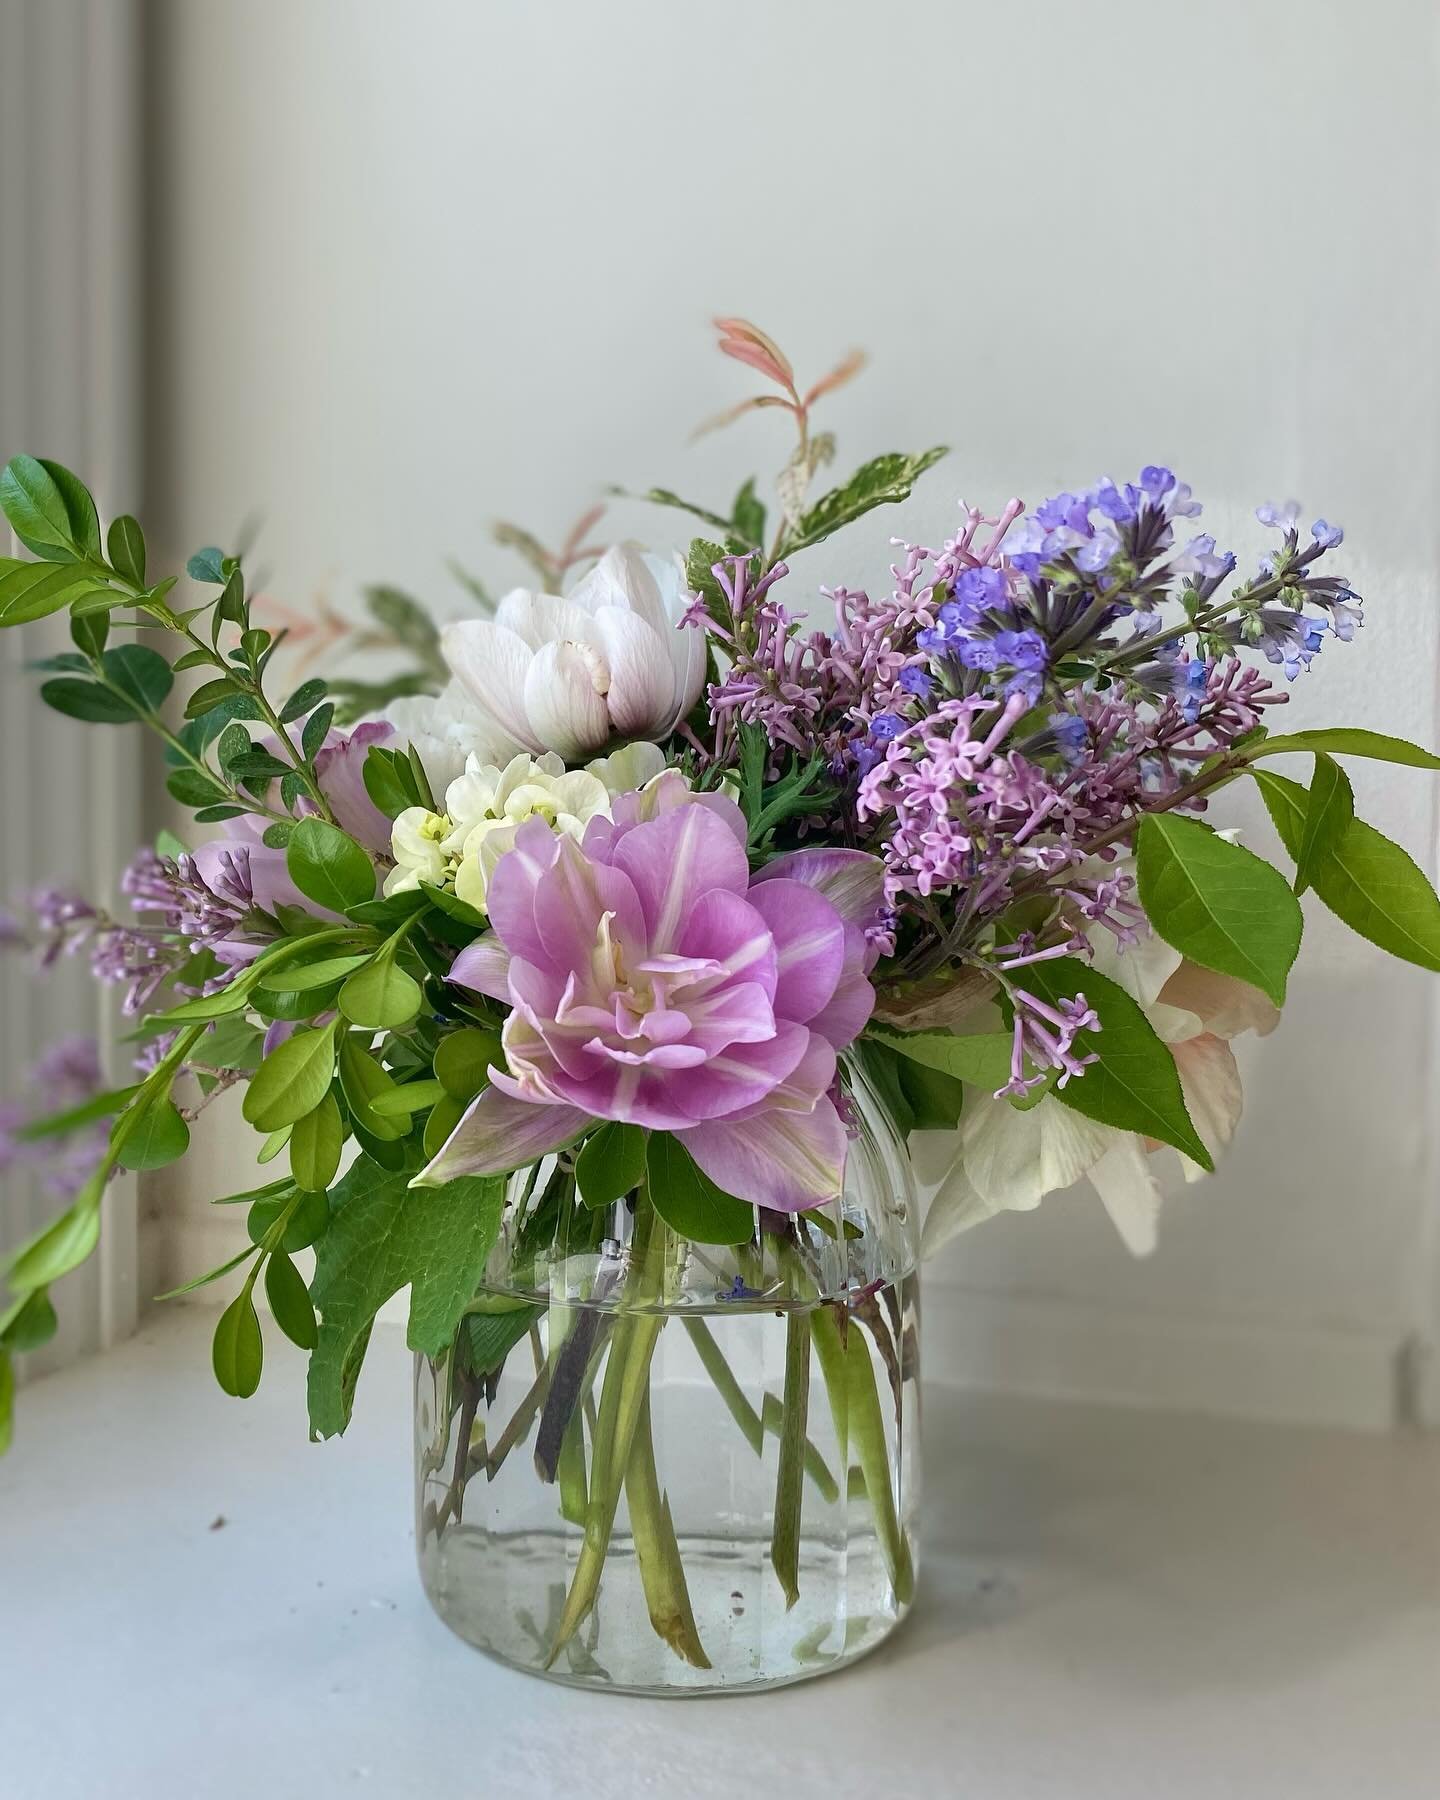 Mother&rsquo;s Day is next weekend! Our arrangements and bouquets are all overflowing with locally grown blooms and seasonal foliage. We&rsquo;re still taking orders through Wednesday, 5/8 for pickup or delivery, and we&rsquo;d love to make something